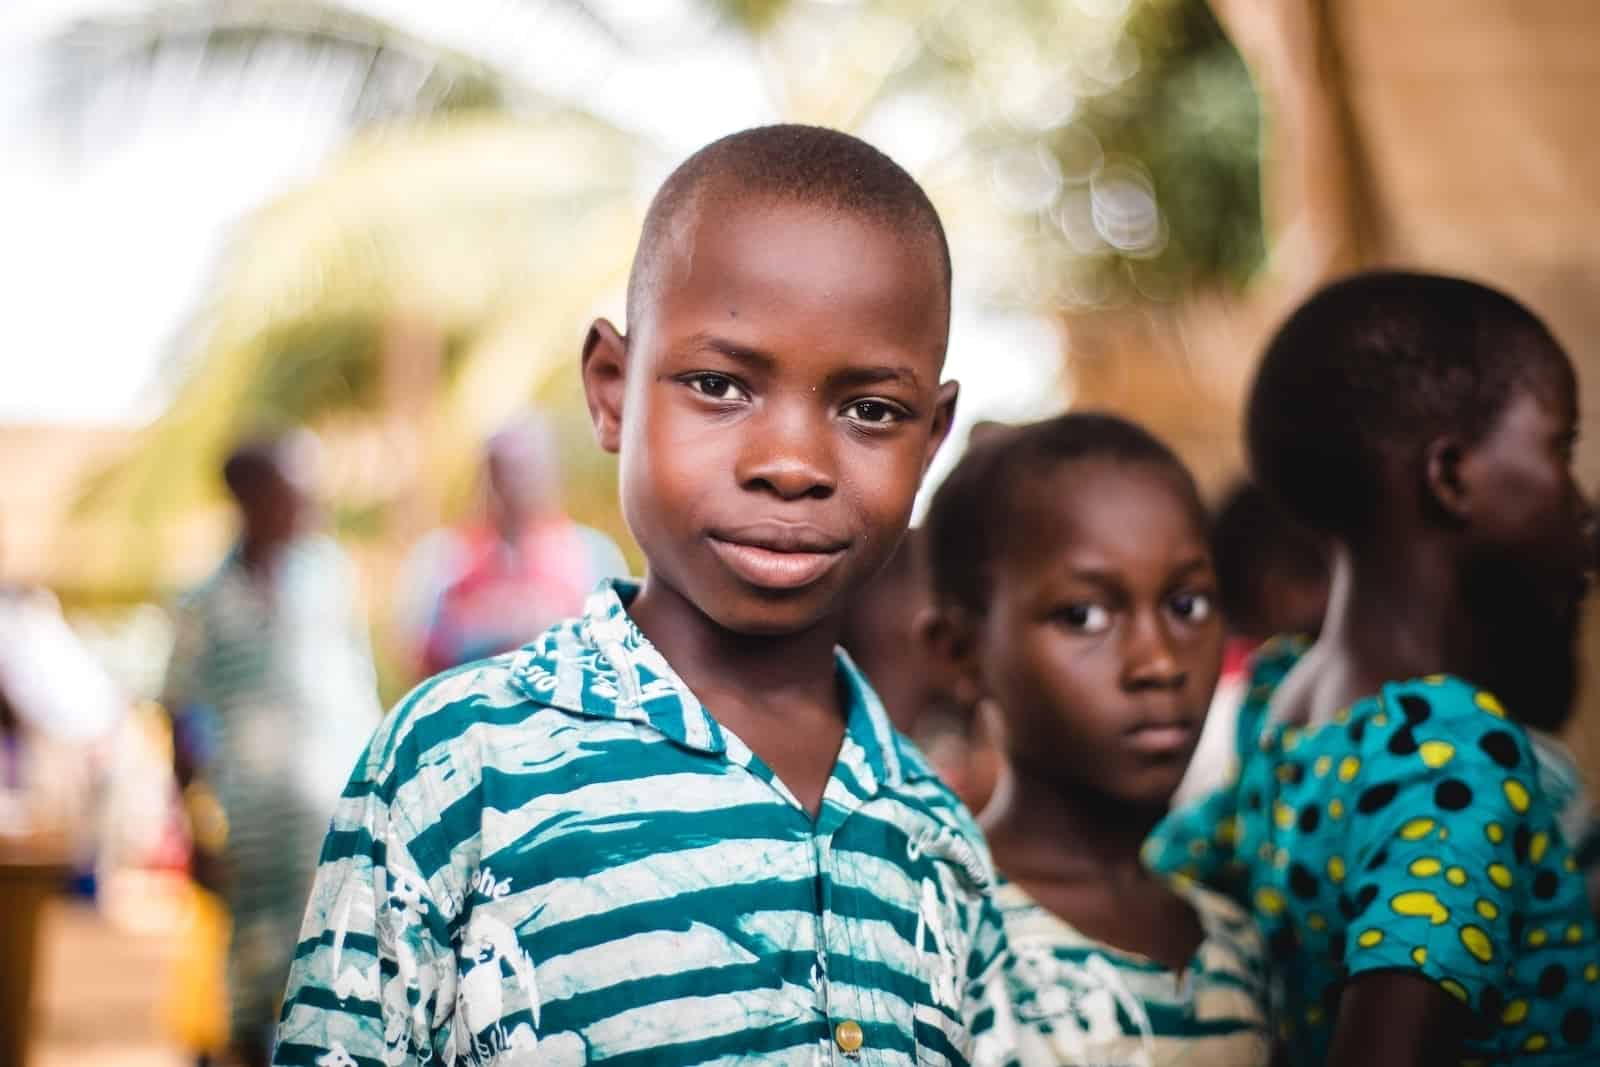 A boy from Togo wearing a green and white shirt looks into the camera. He is surrounded by children wearing similar colors. They stand outside with palm trees in the background.